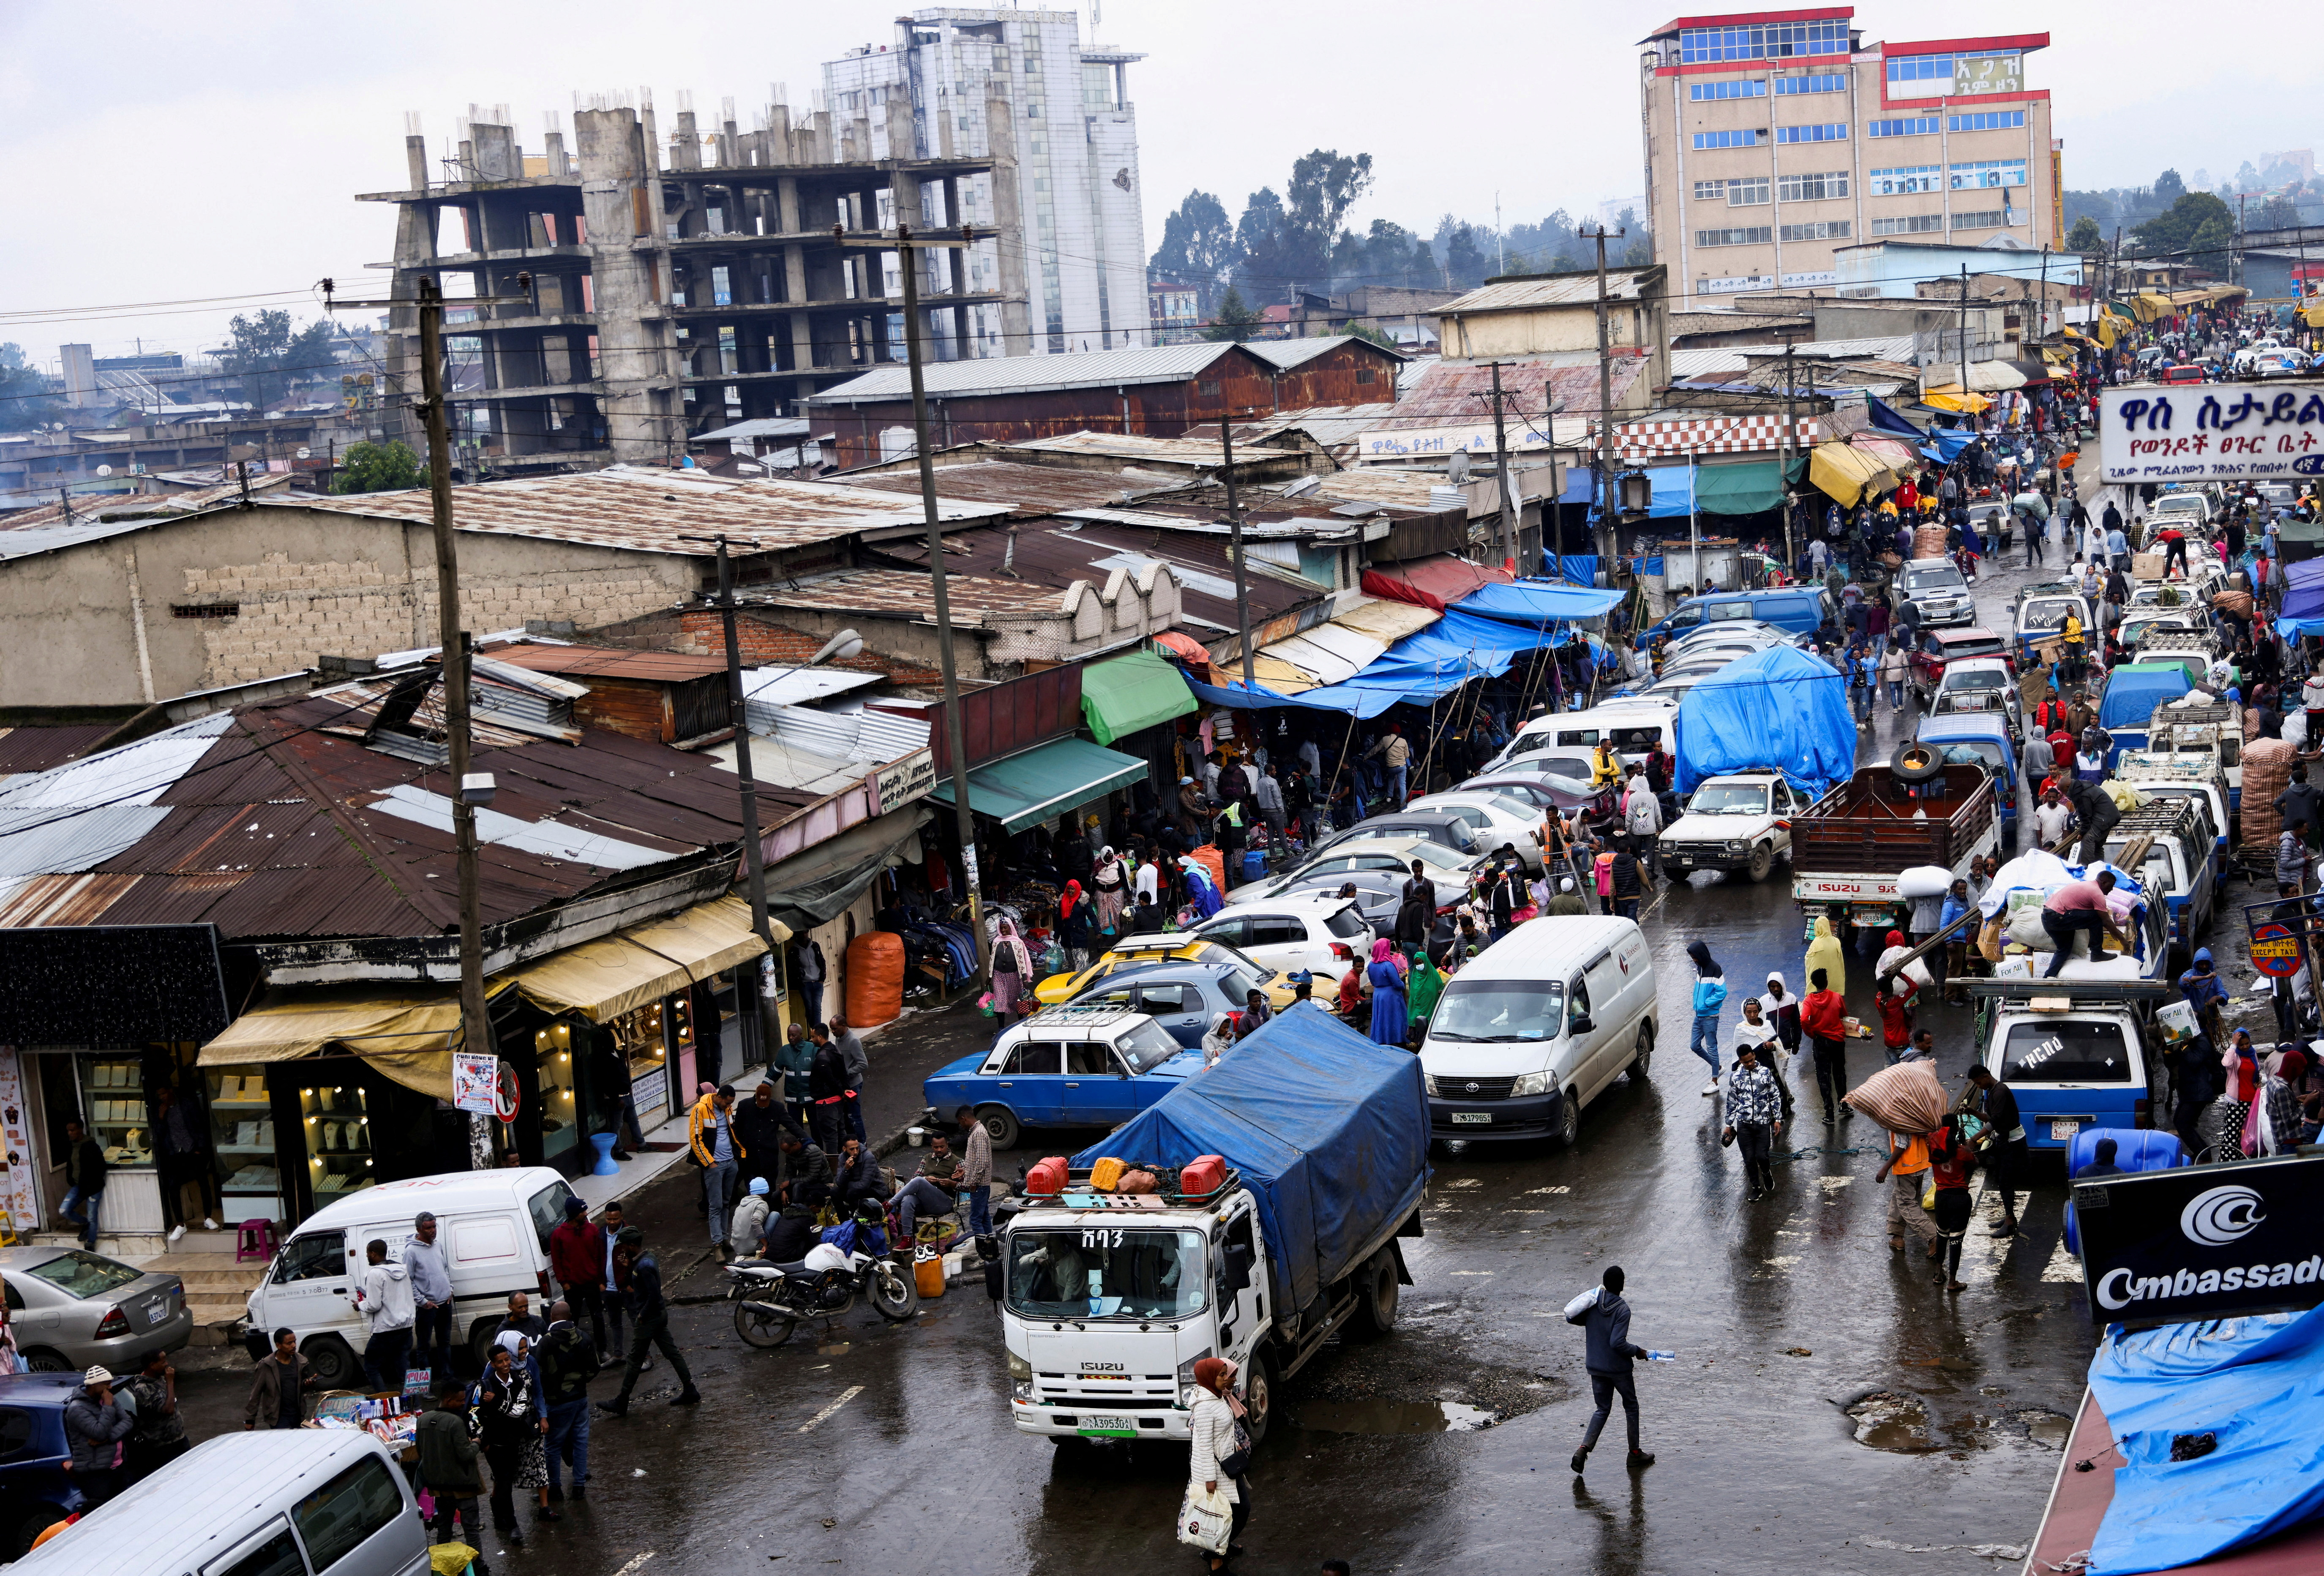 A view shows the Mercato open-air marketplace in Ketema, district of Addis Ababa, Ethiopia